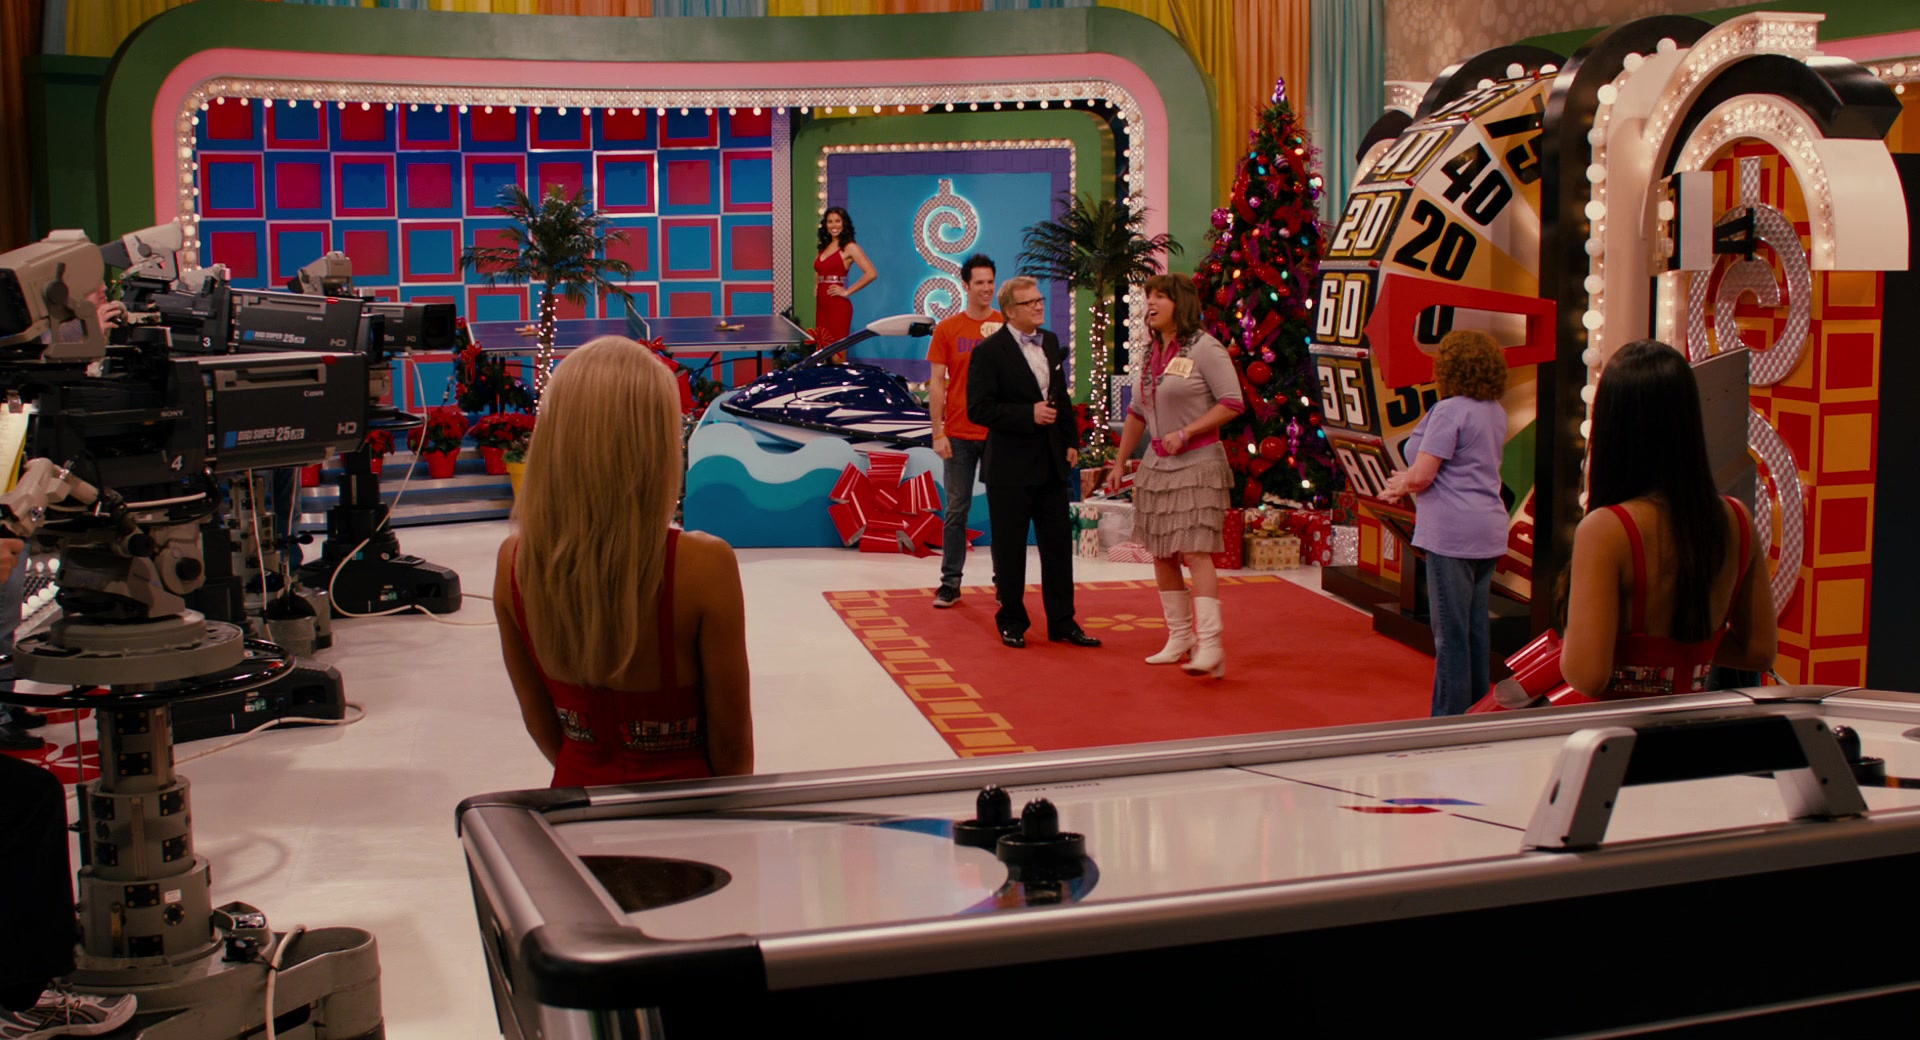 The Price Is Right Game Show in Jack and Jill (2011) .